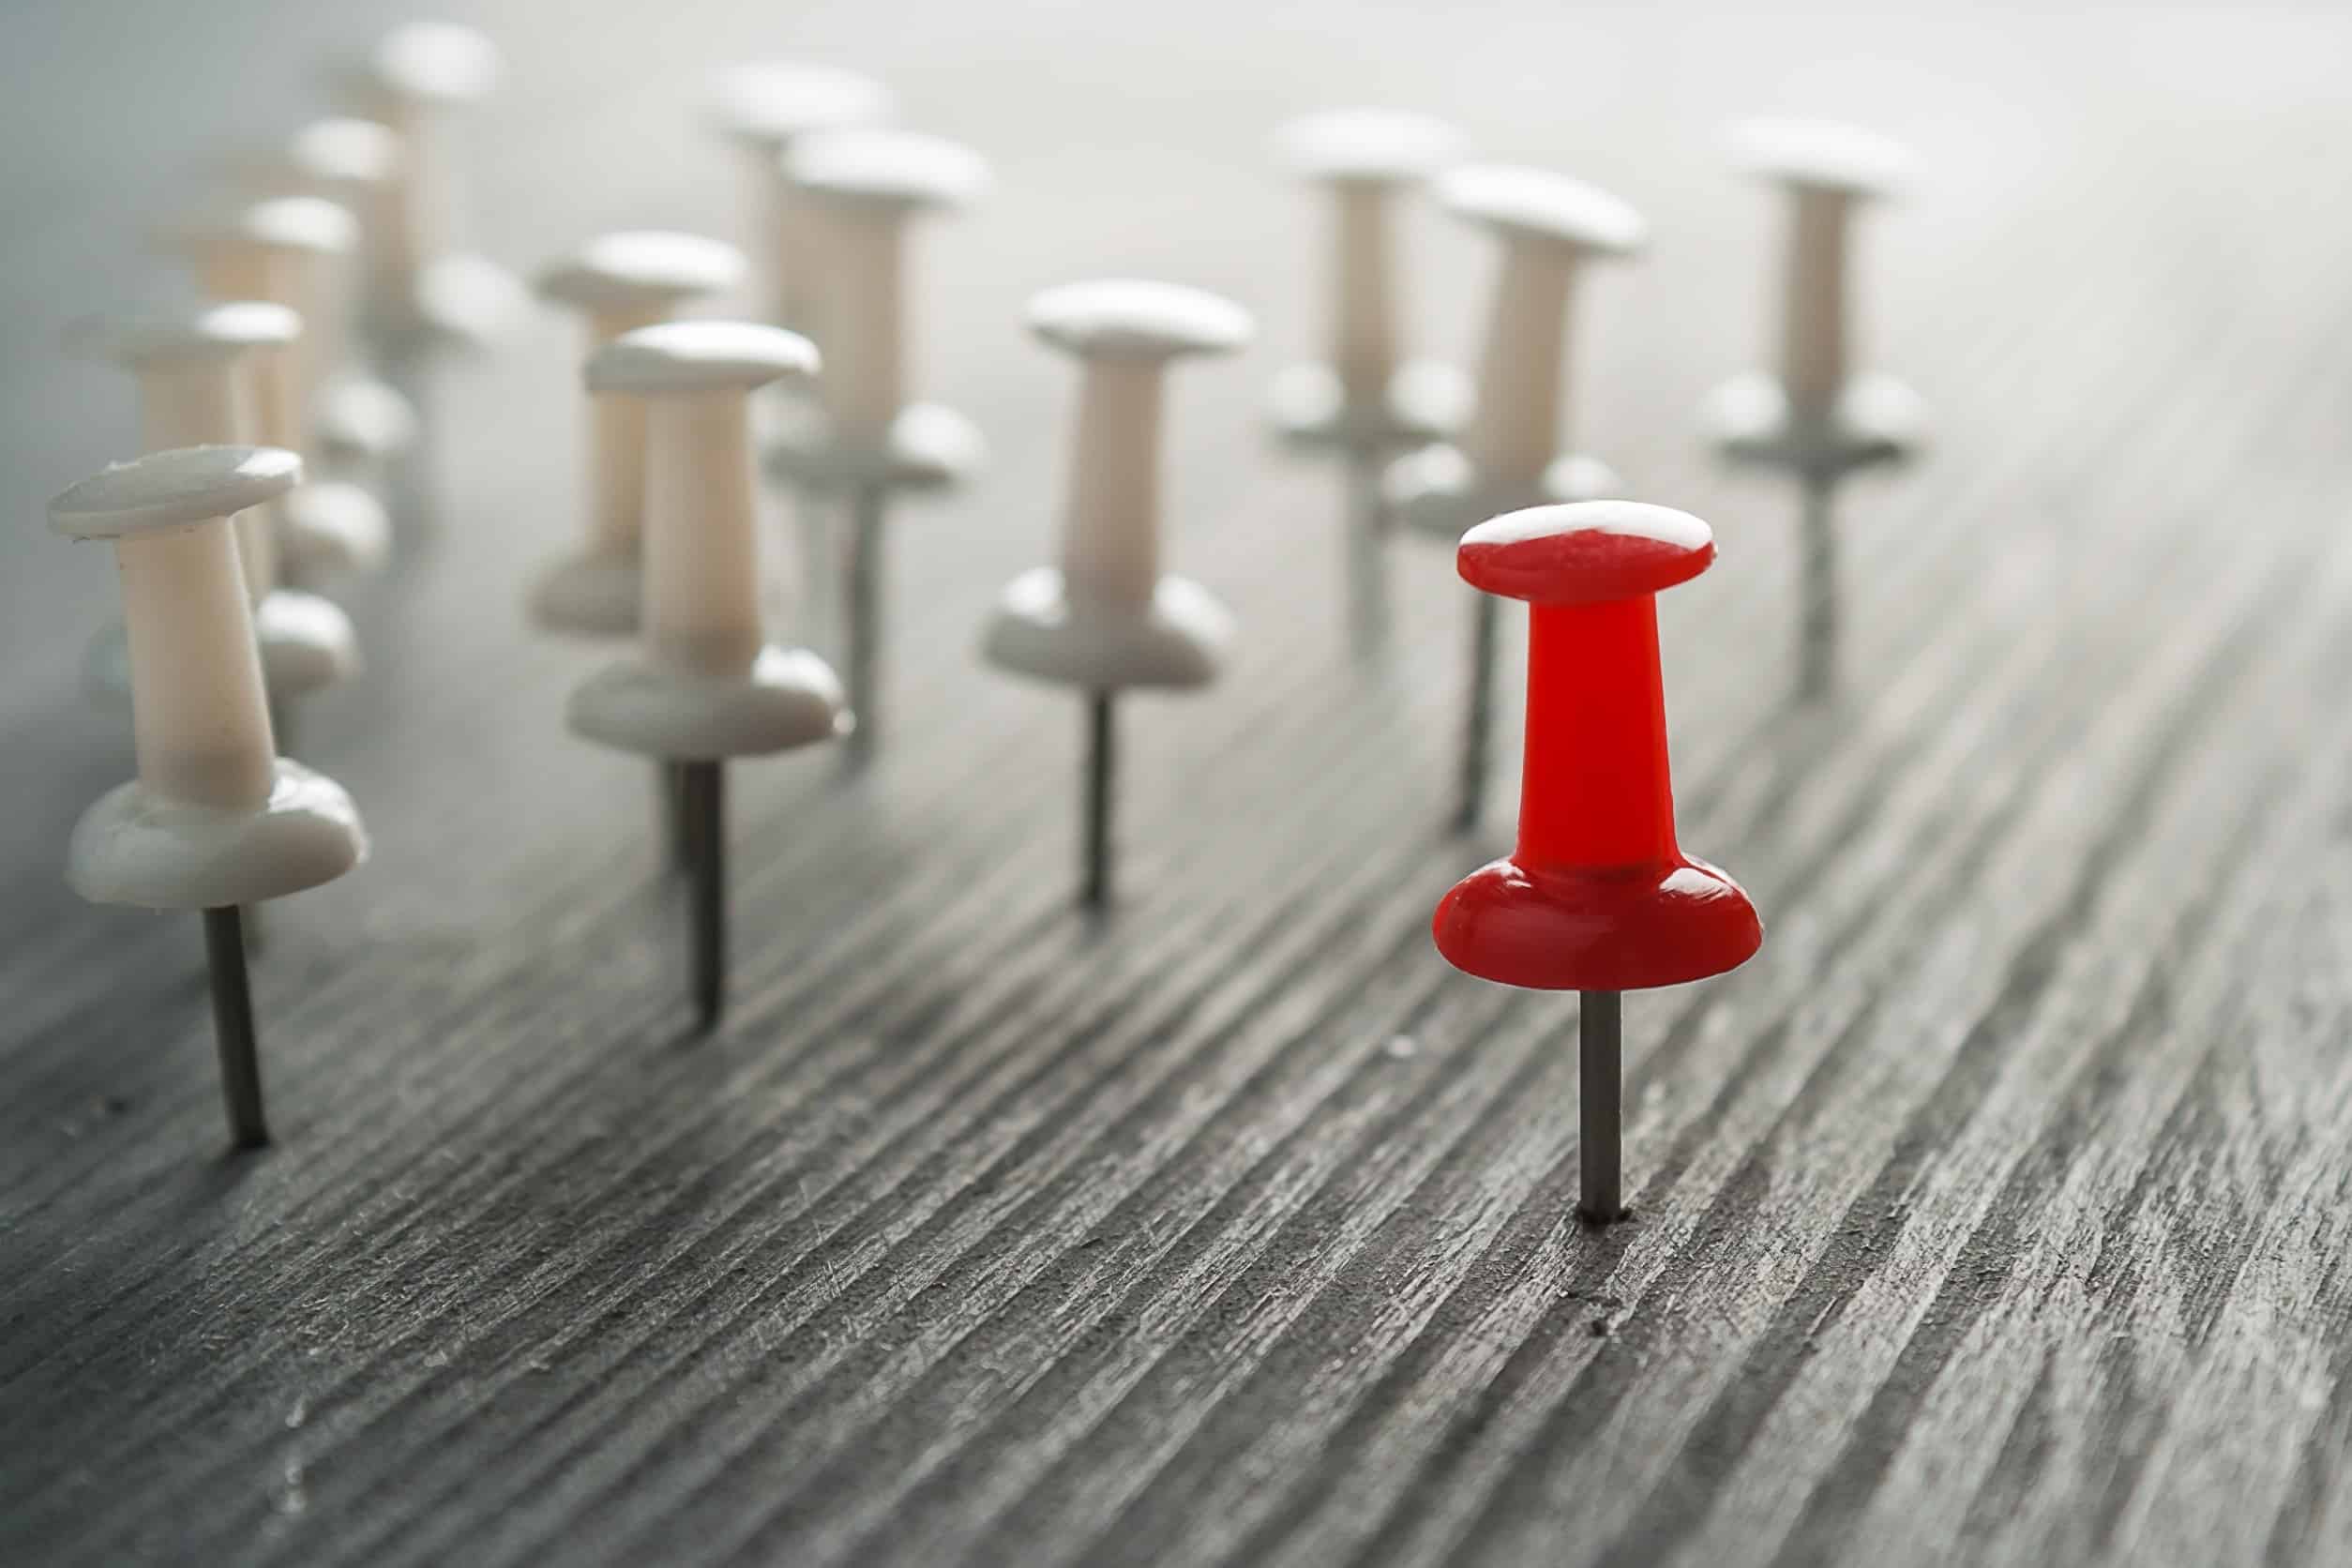 A red pushpin standing out against many white pushpins, representing distinctive competencies.